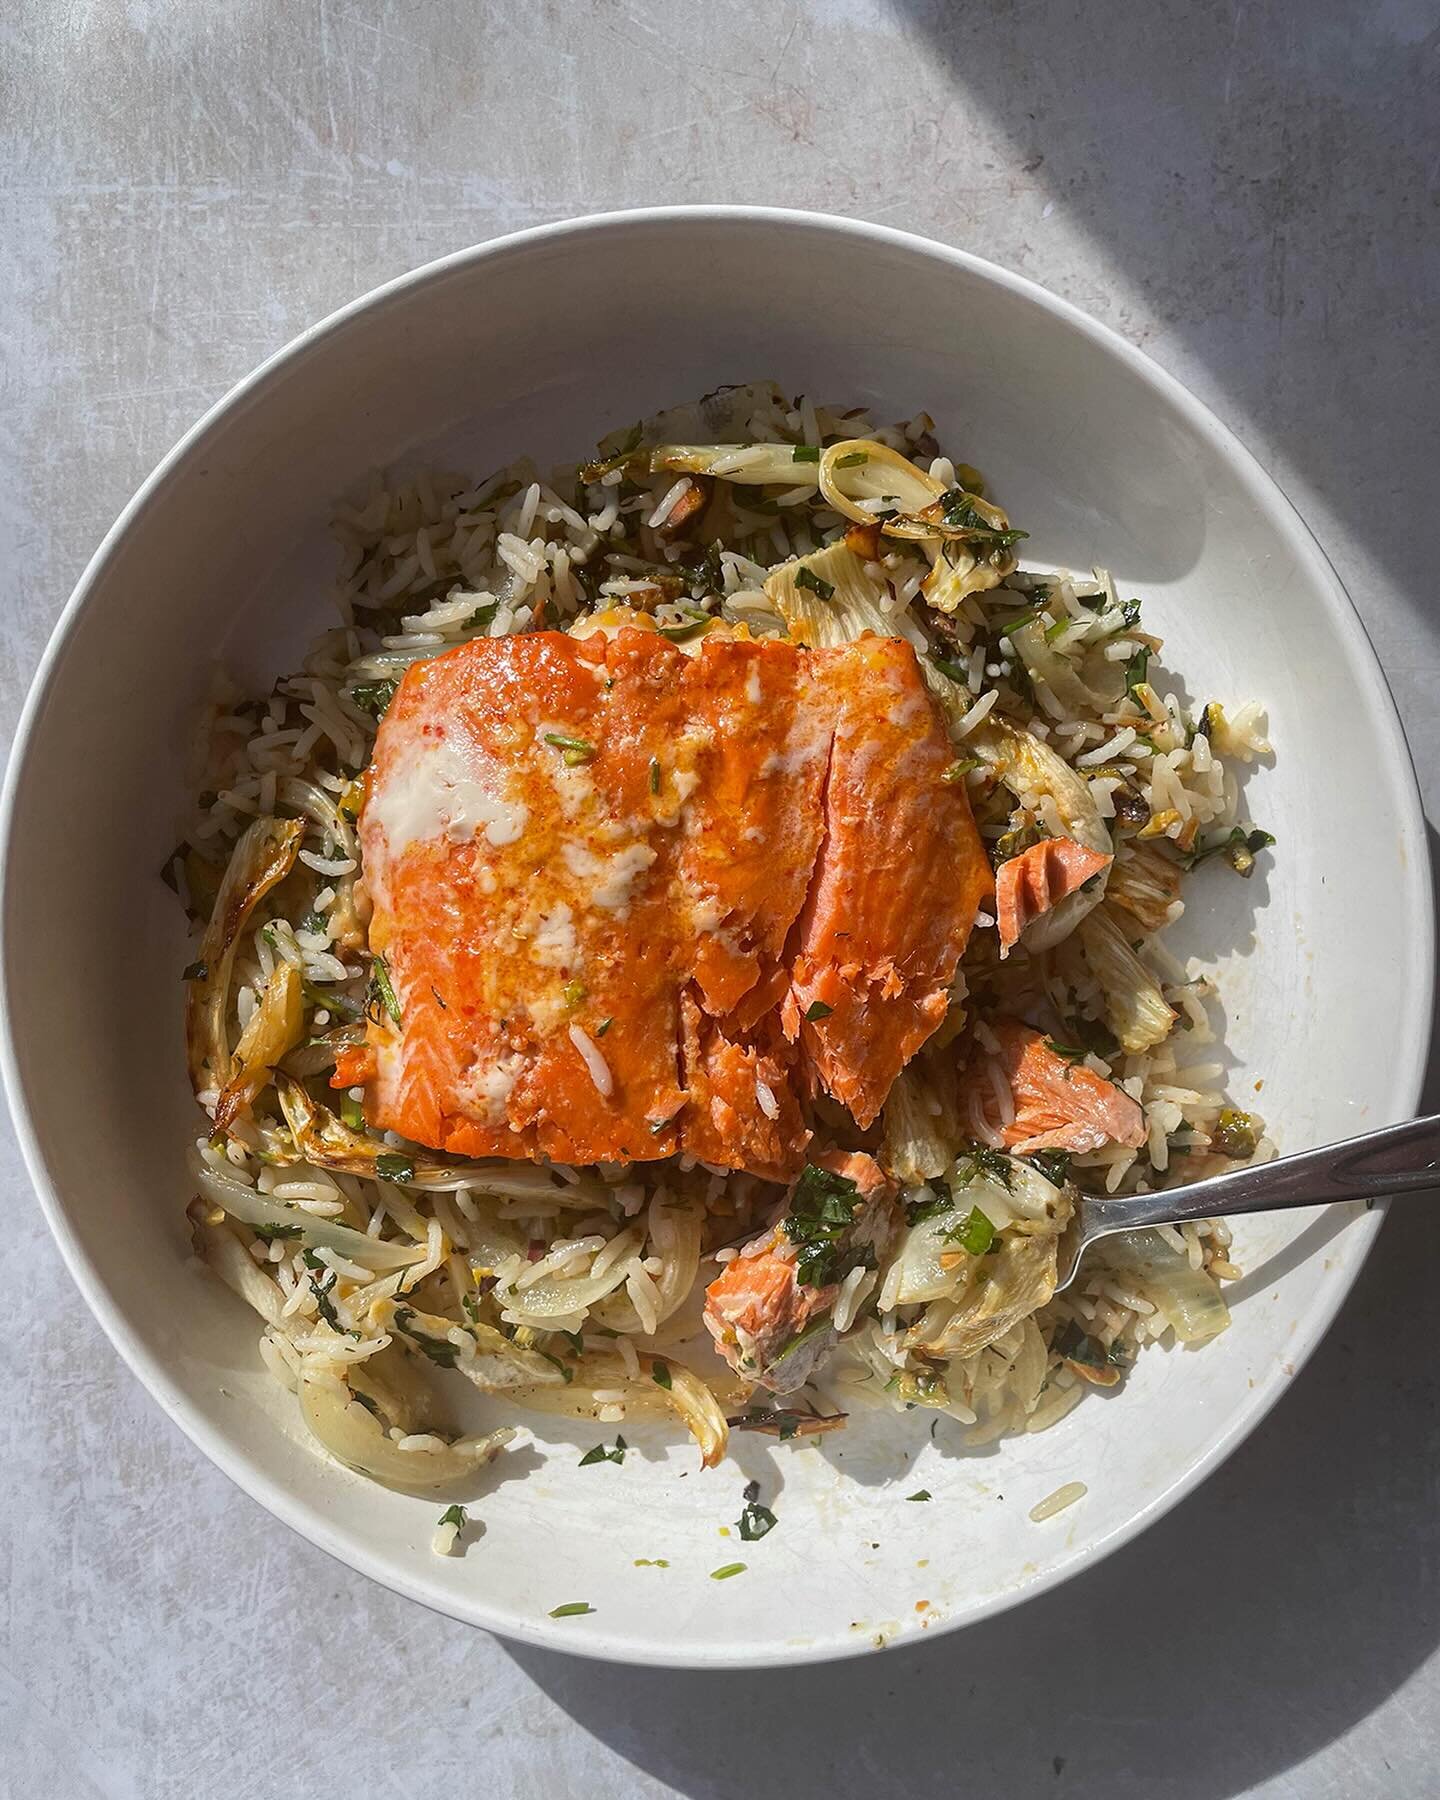 New recipe on the blog this week, Sriracha Salmon with Fennel Garlic Herb Rice!

Flaky, buttery honey Sriracha roasted salmon served alongside a fluffy garlicky herb rice. This super simple rice recipe is full of caramelized fennel and onions, lots o